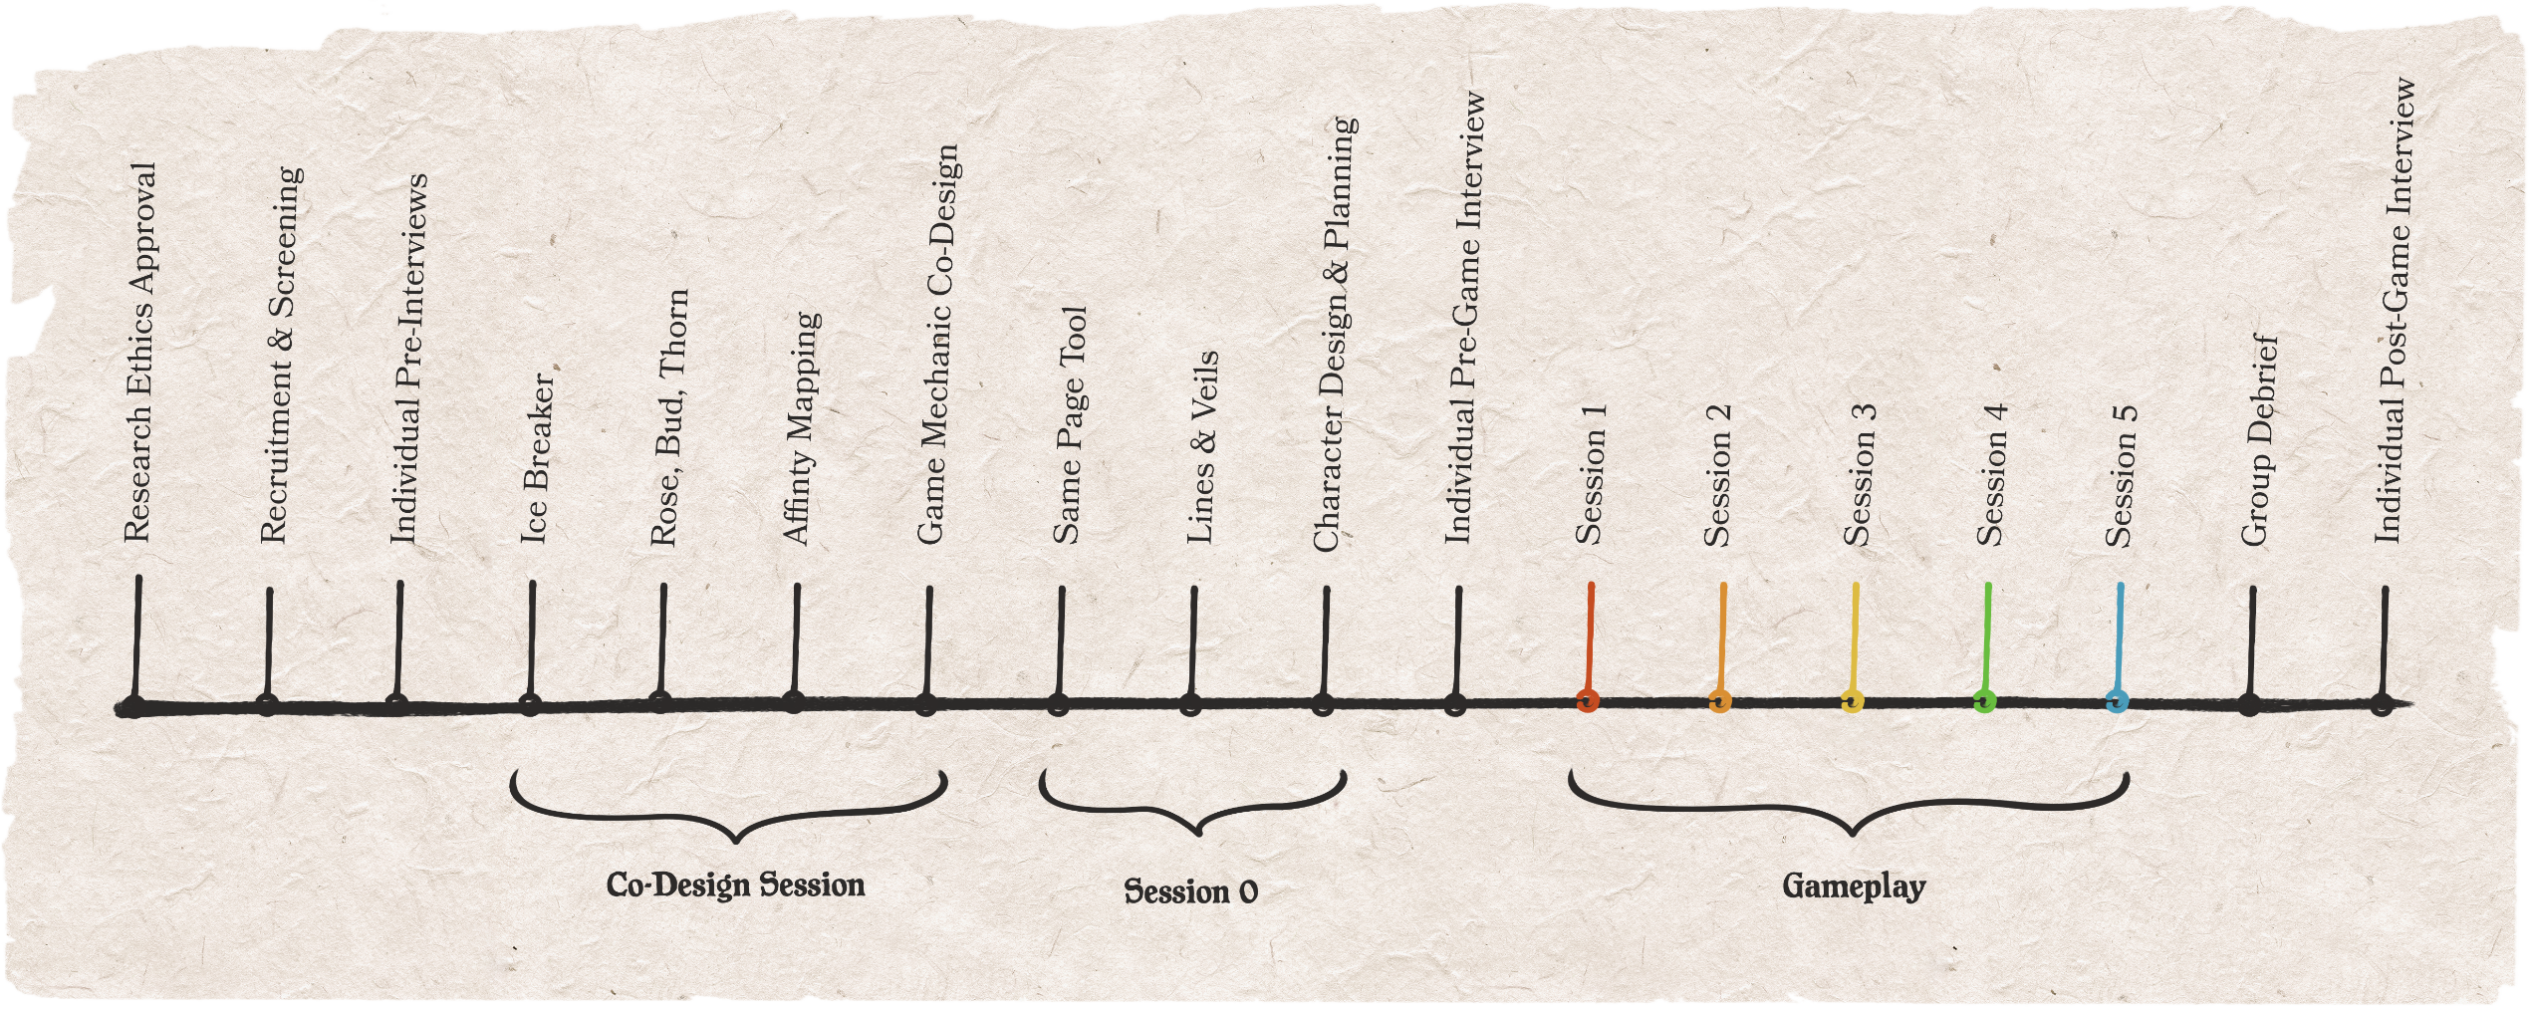 Research timeline